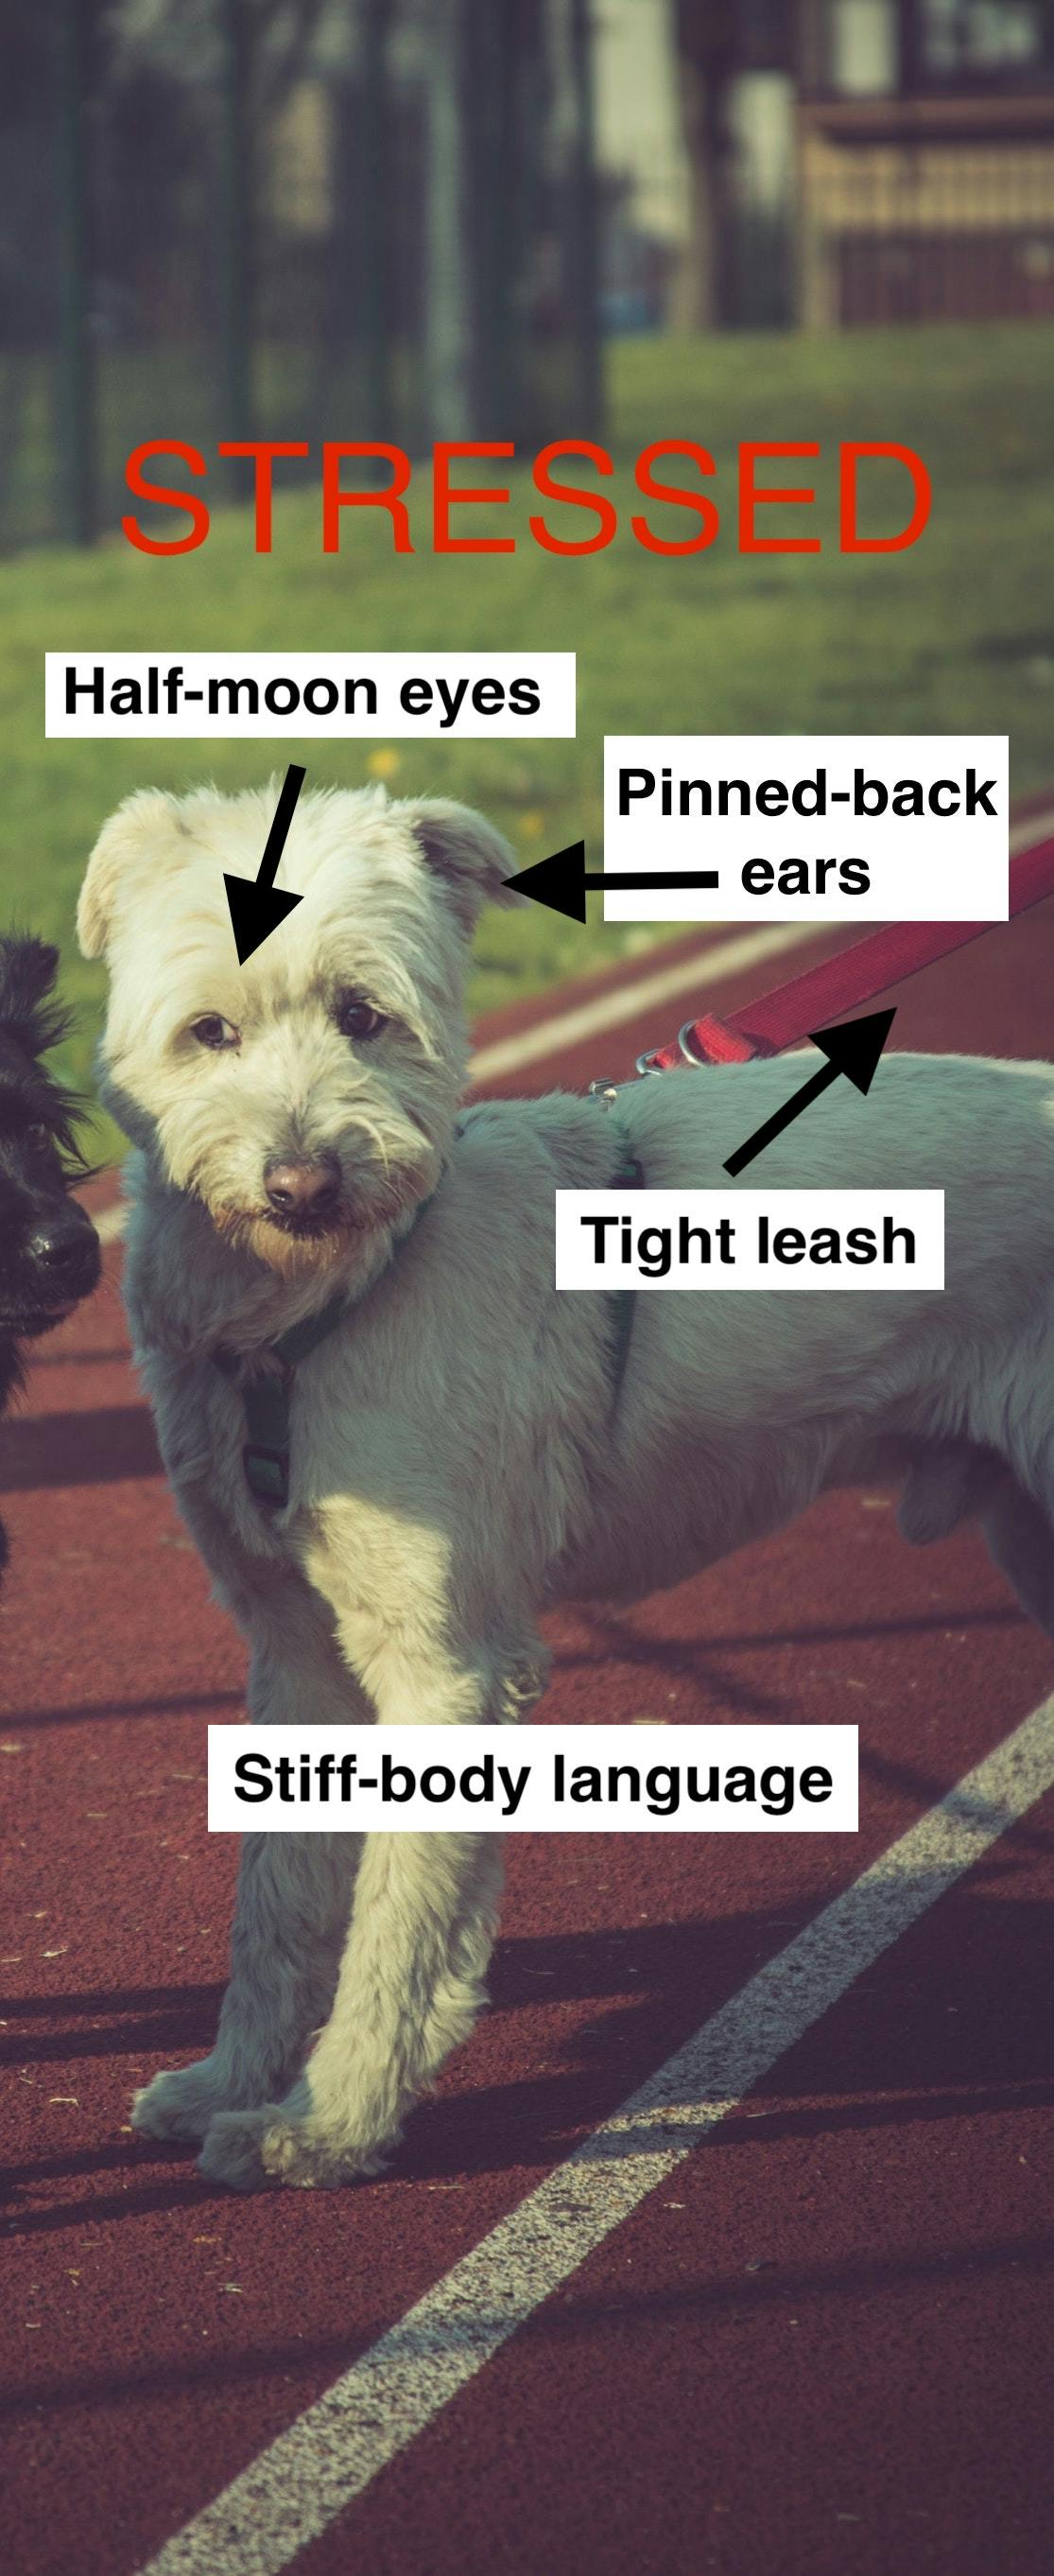 Words overlay an image of a dog meeting another dog, pointing out signs of stress